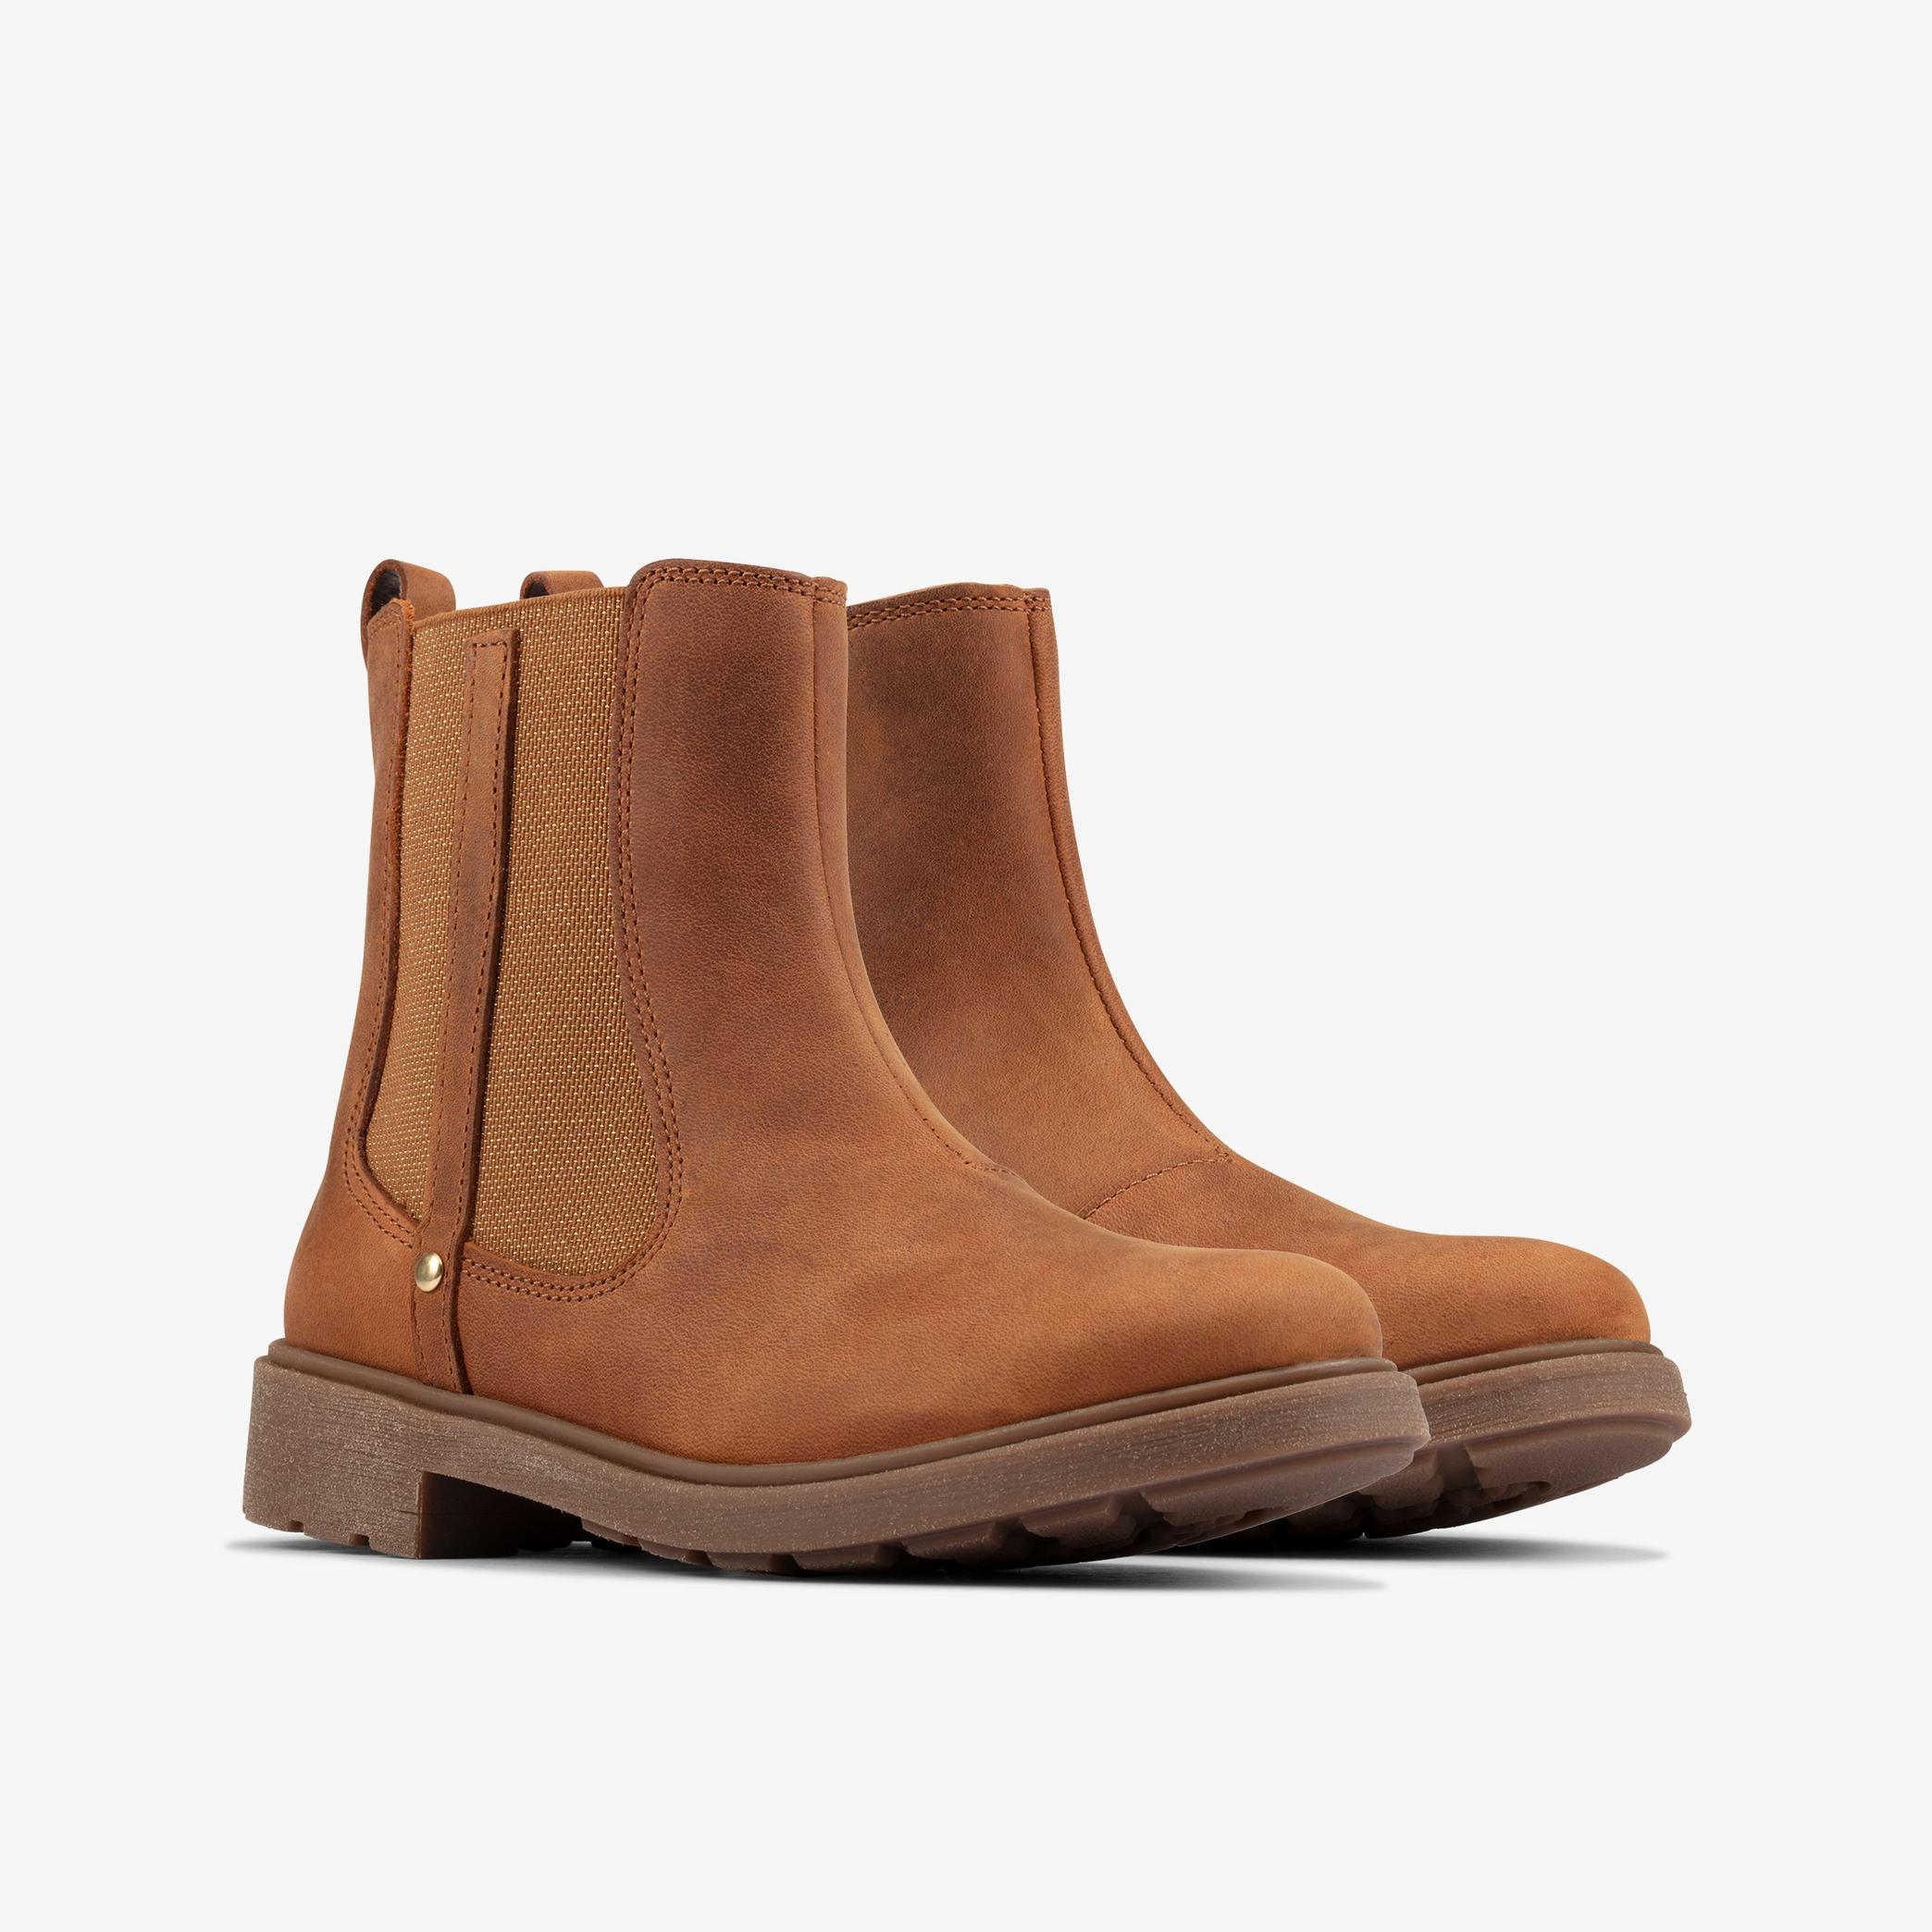 Astrol Orin Kid Tan Leather Chelsea Boots, view 4 of 6